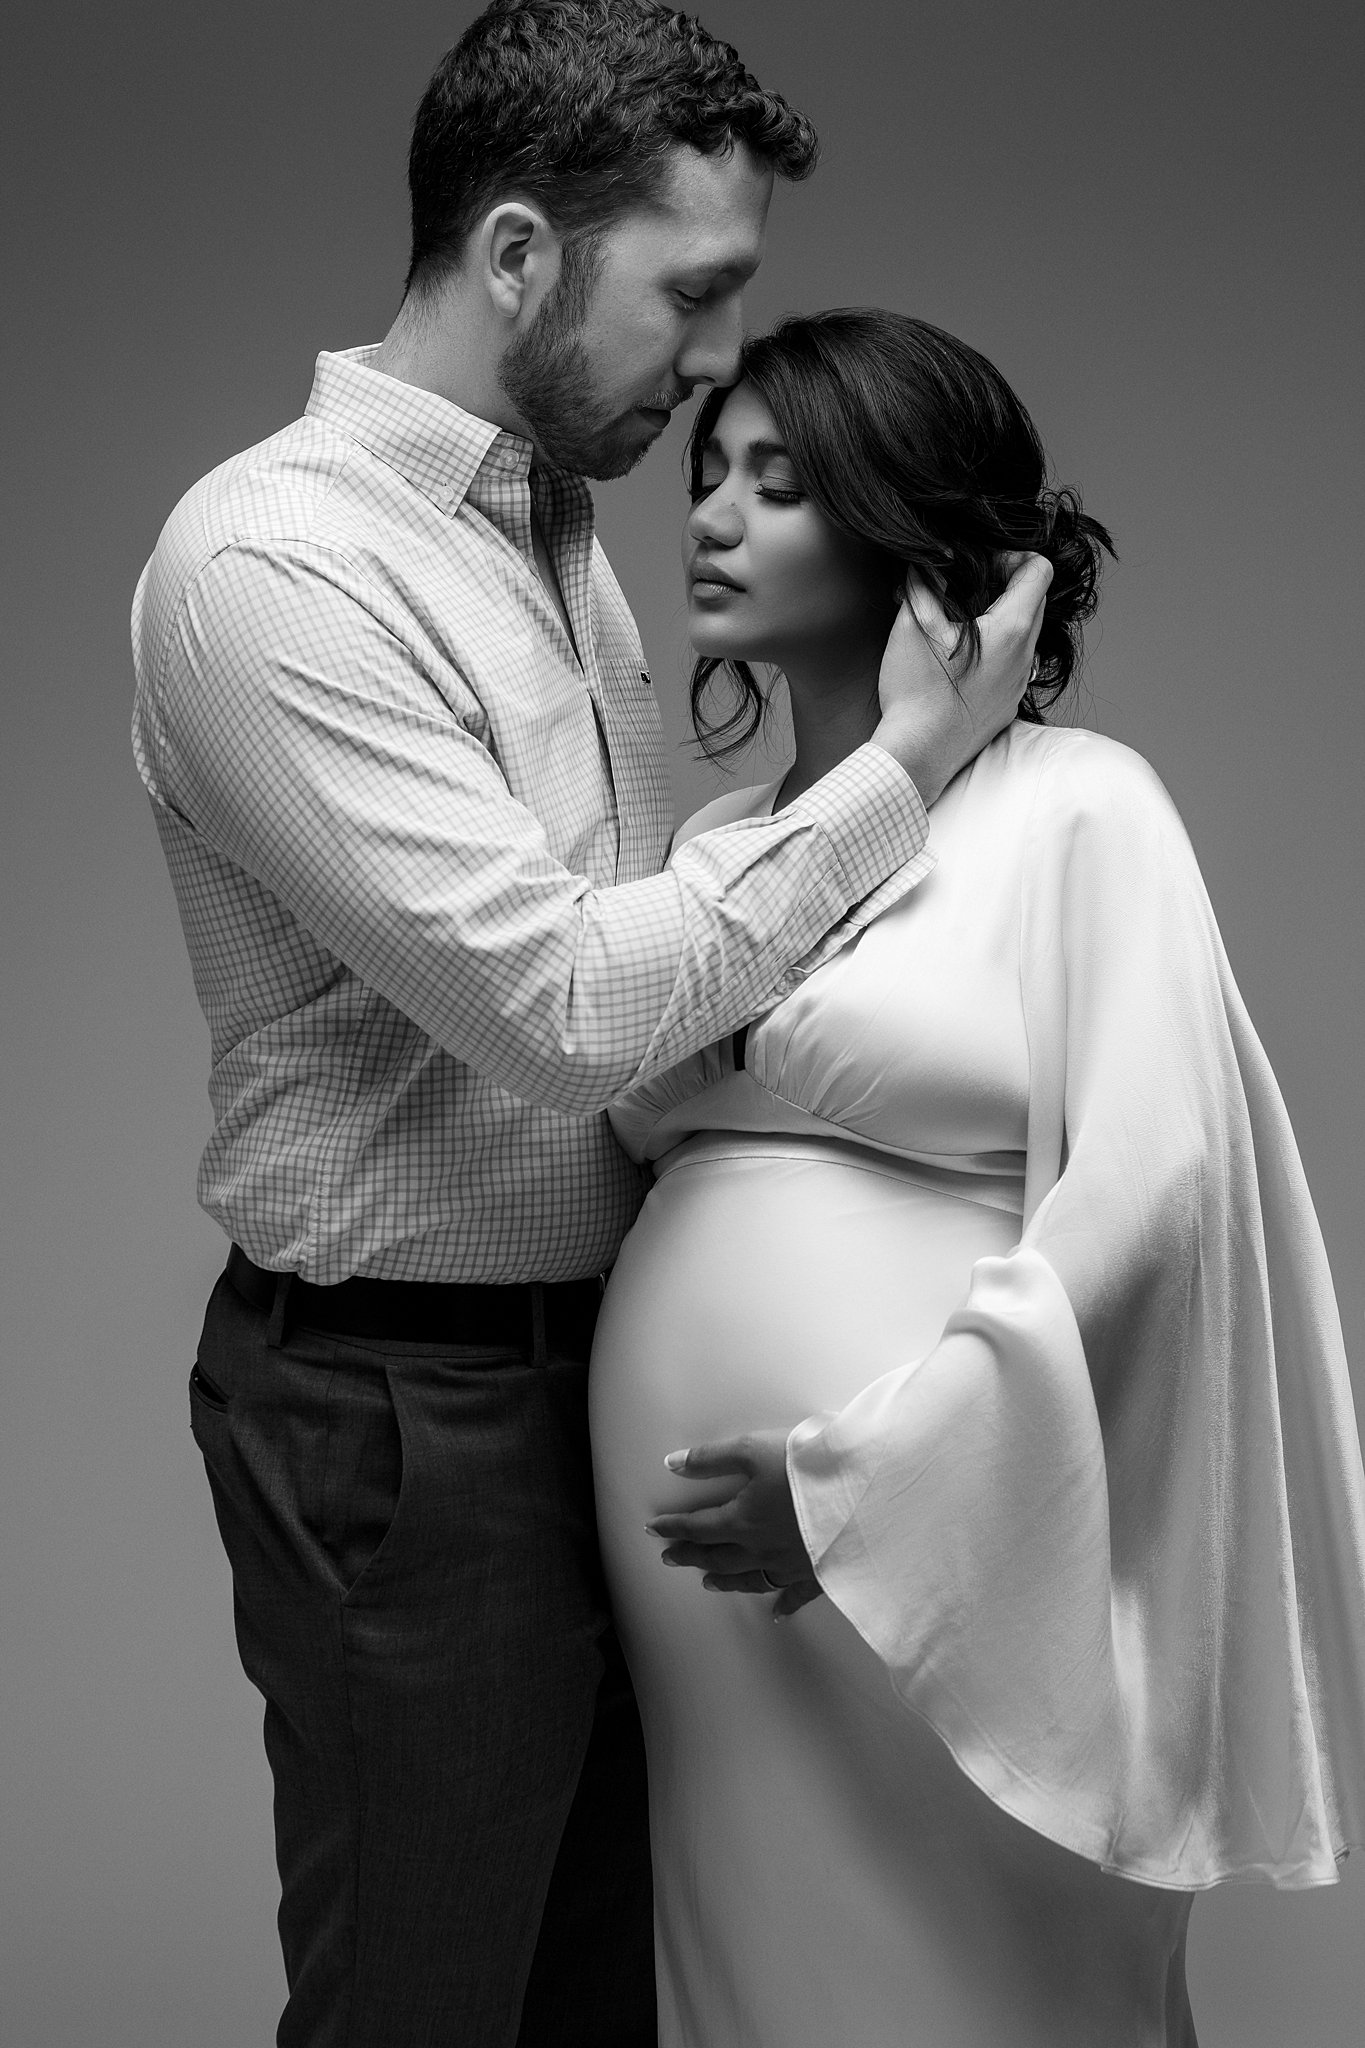 A mother to be in a white maternity dress stands in a studio while her husband leans in to kiss her forehead